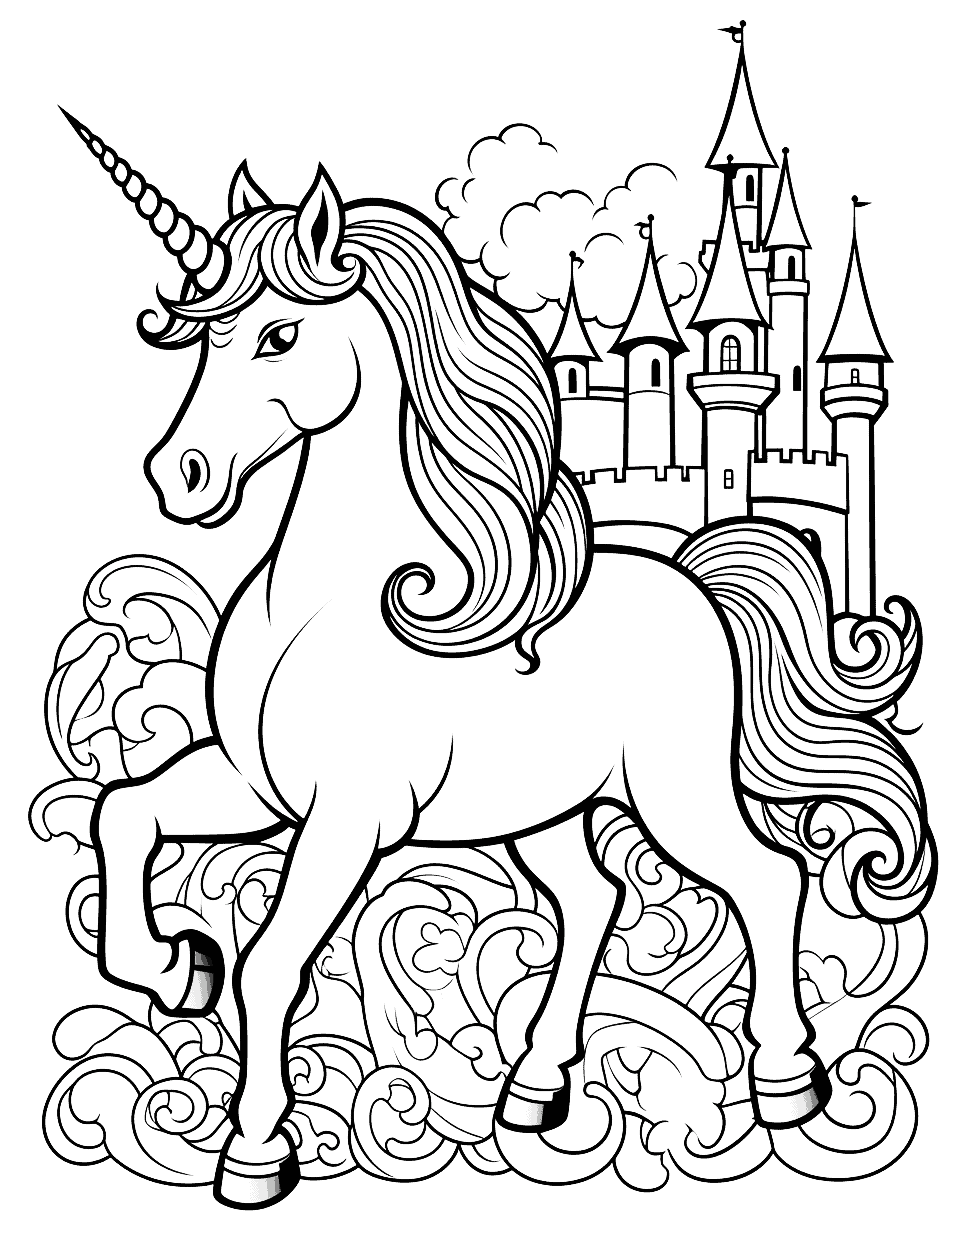 Unicorn Tapestry Coloring Page - A unicorn with a medieval tapestry, a castle, and other medieval motifs.